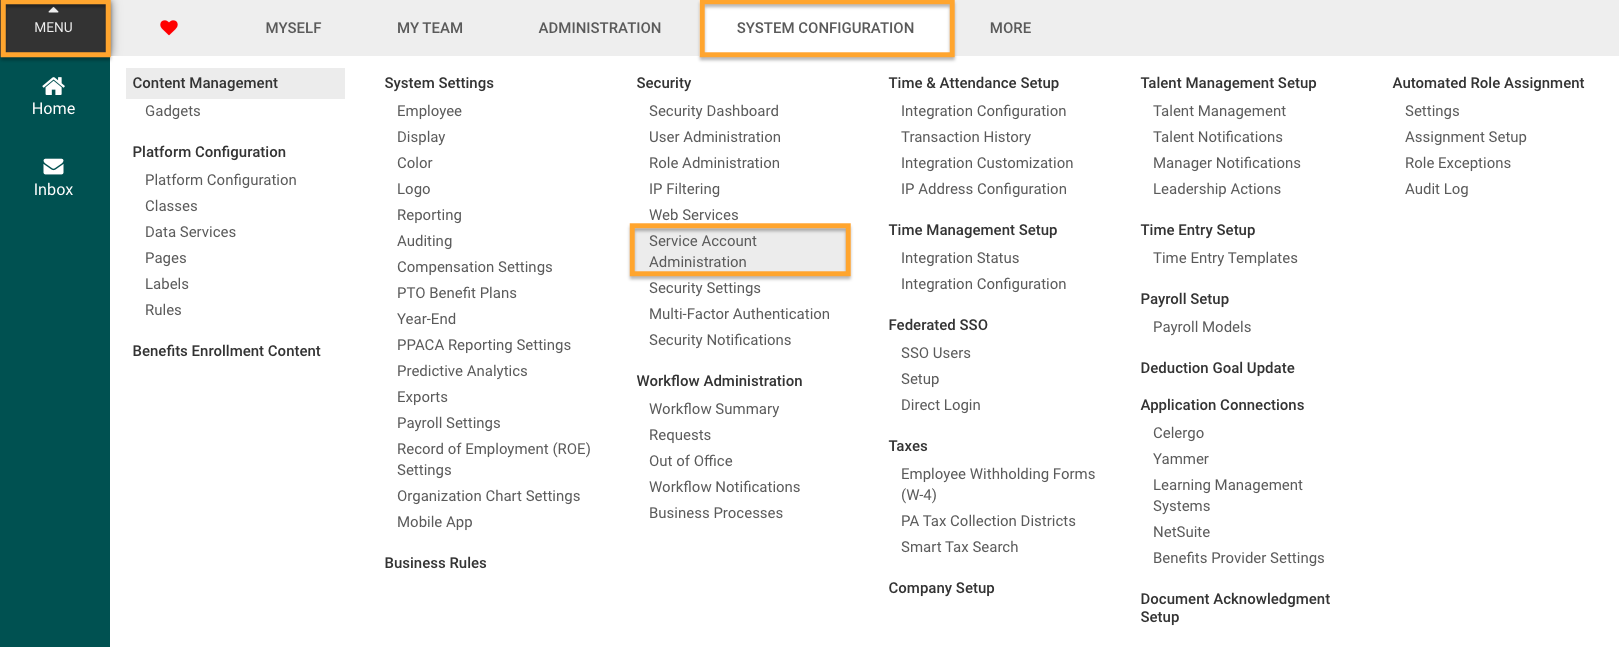 UKG UltiPro Core shows the Service Account Administration tab highlighted